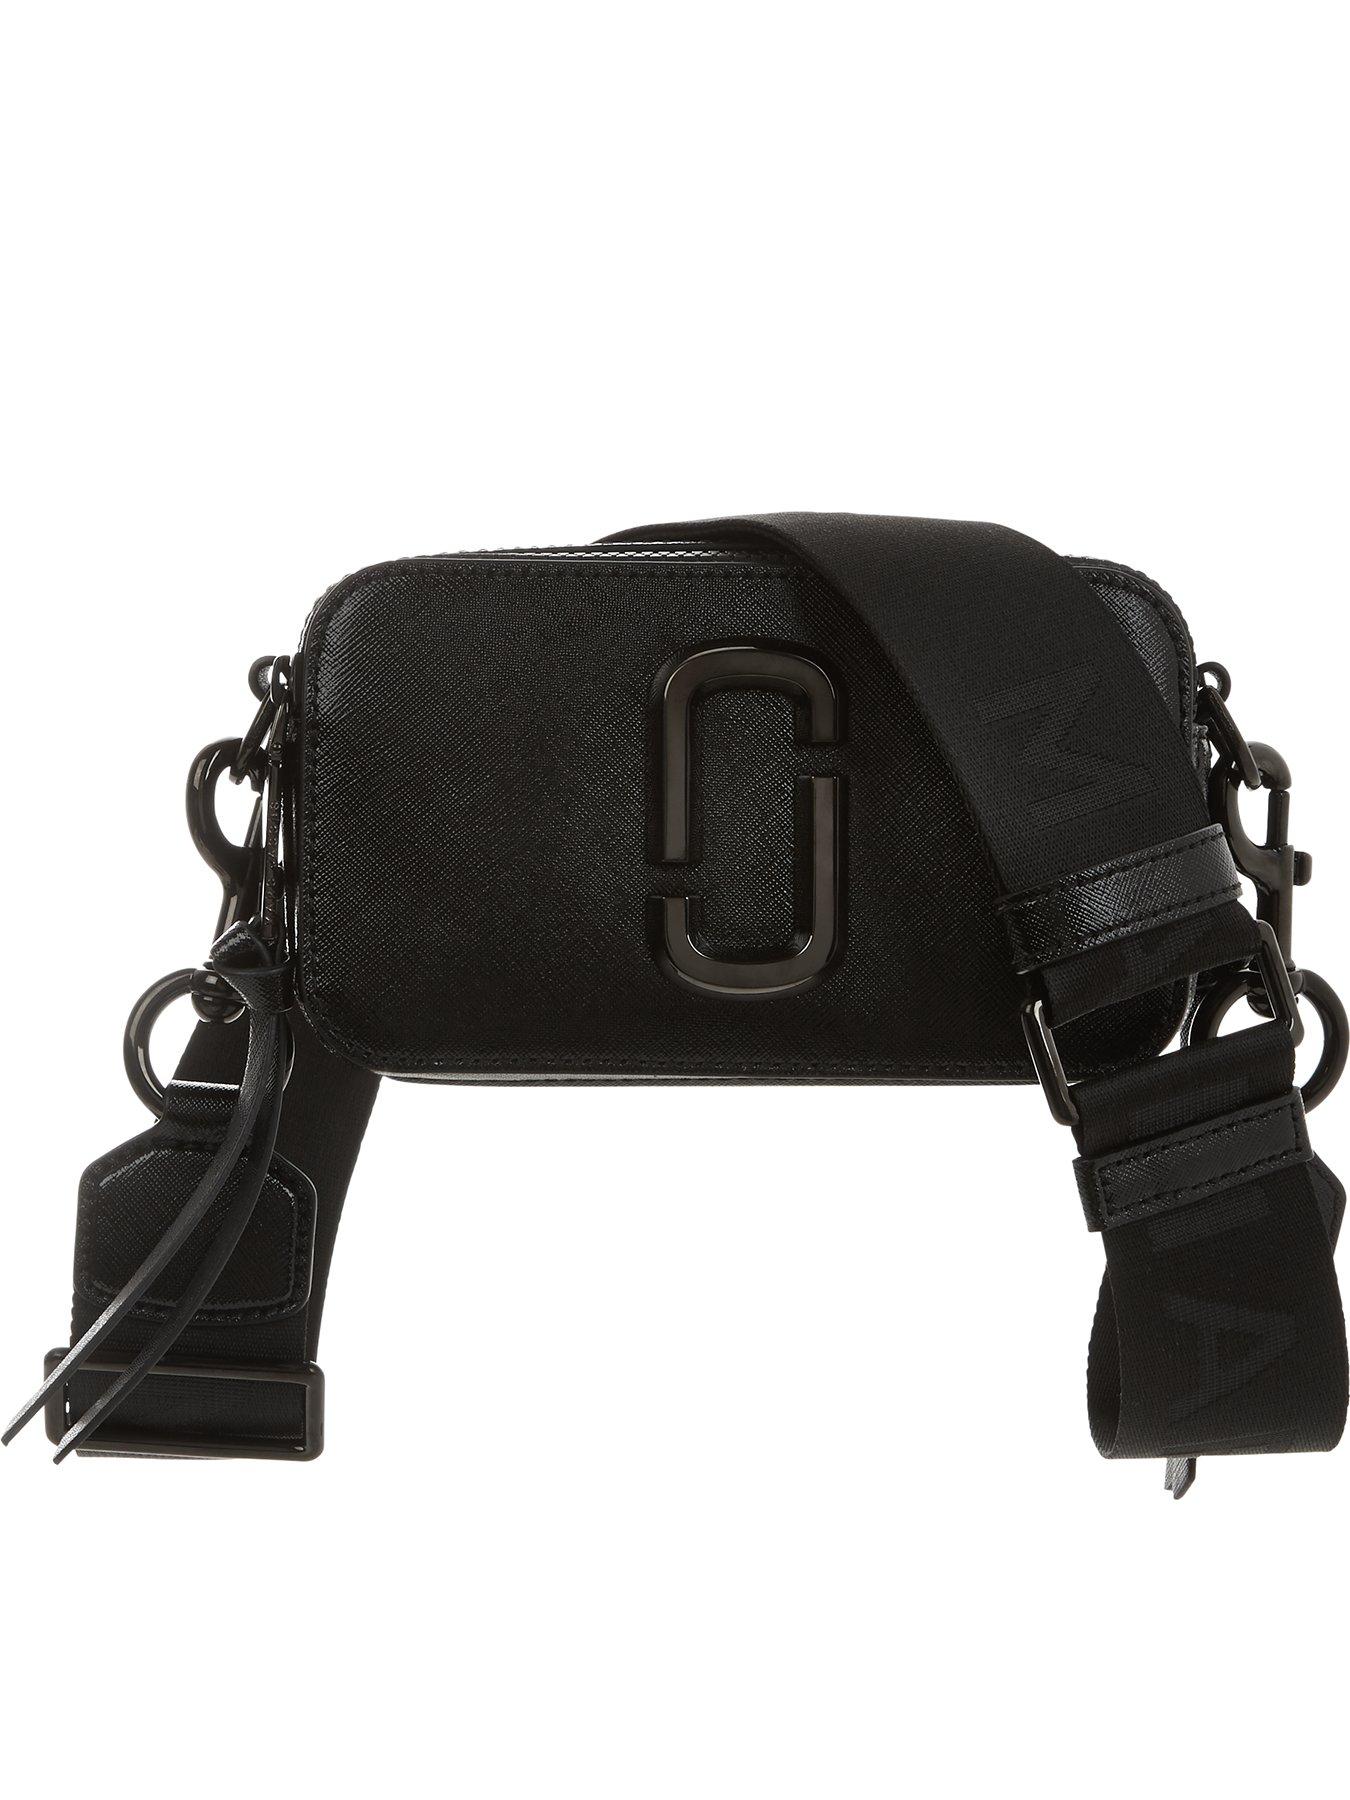 Marc By Marc Jacobs, Bags, Brand New Marc Jacobs Black Crossbody Bag